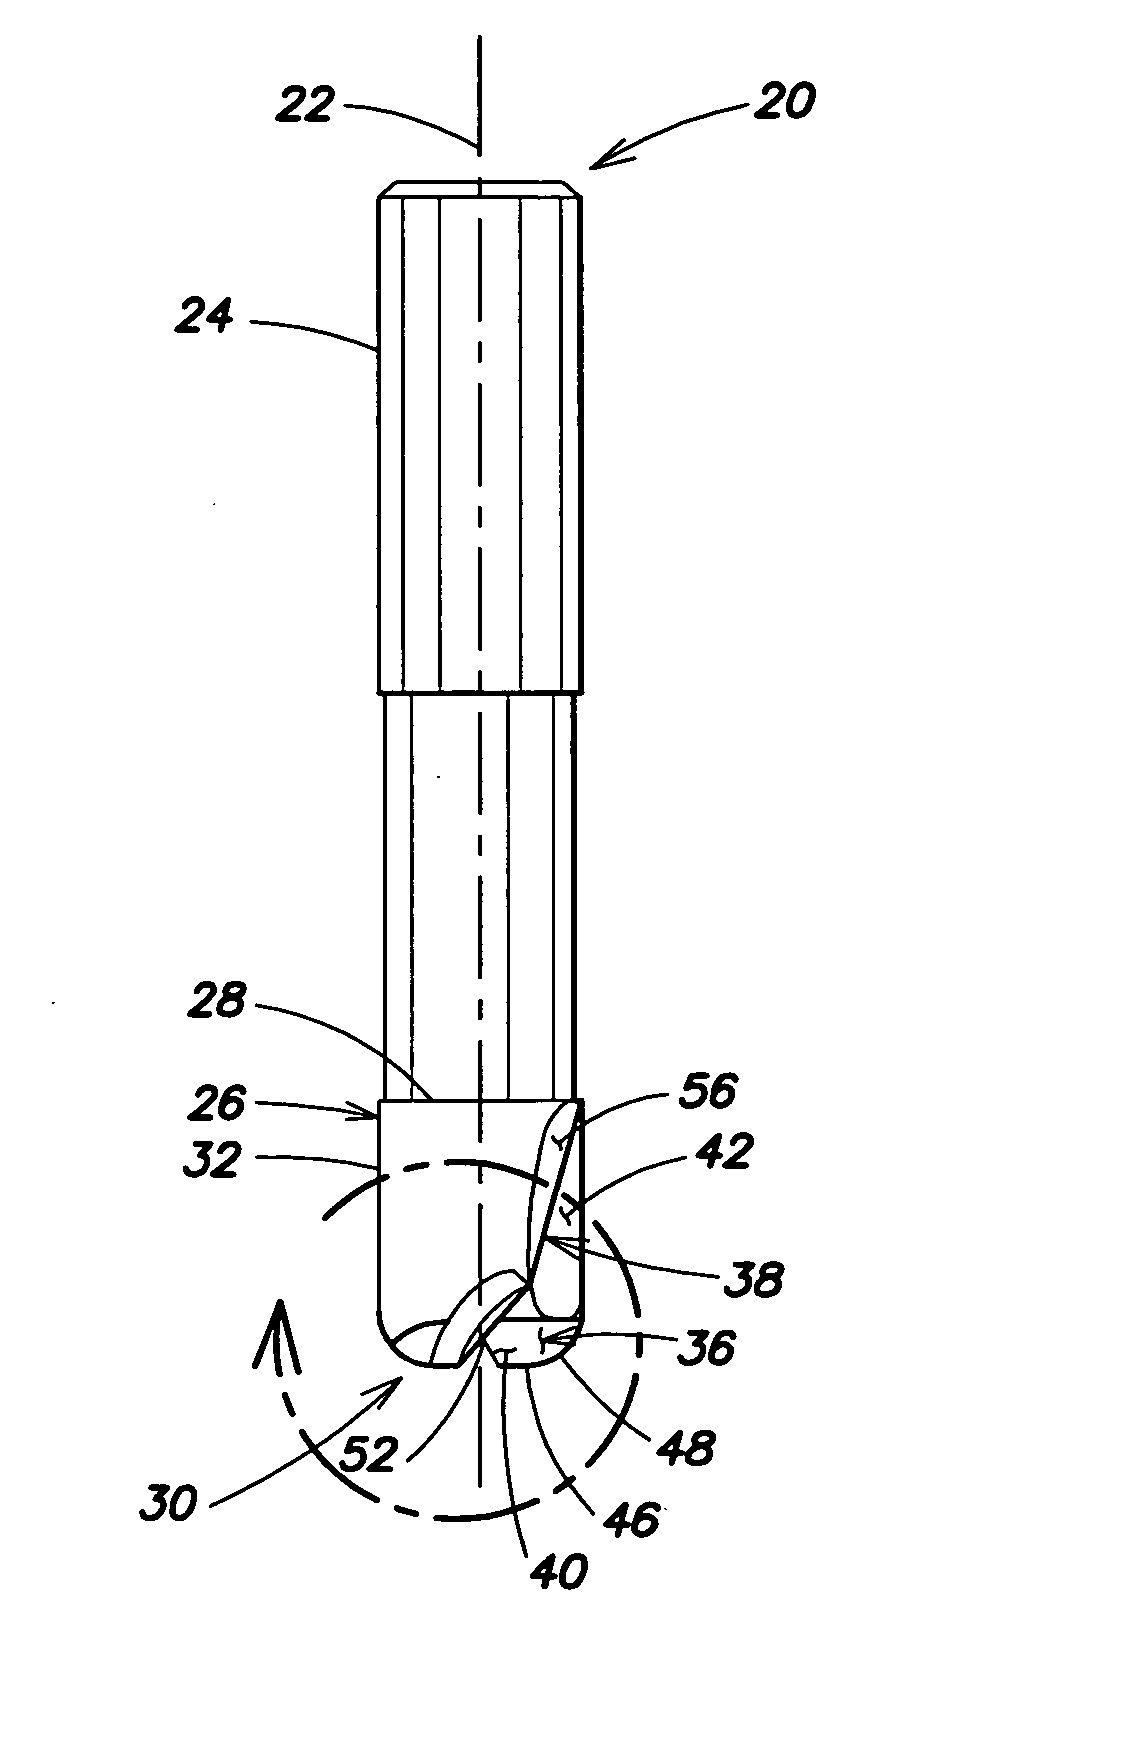 Multiple-axis cutting toroidal end mill